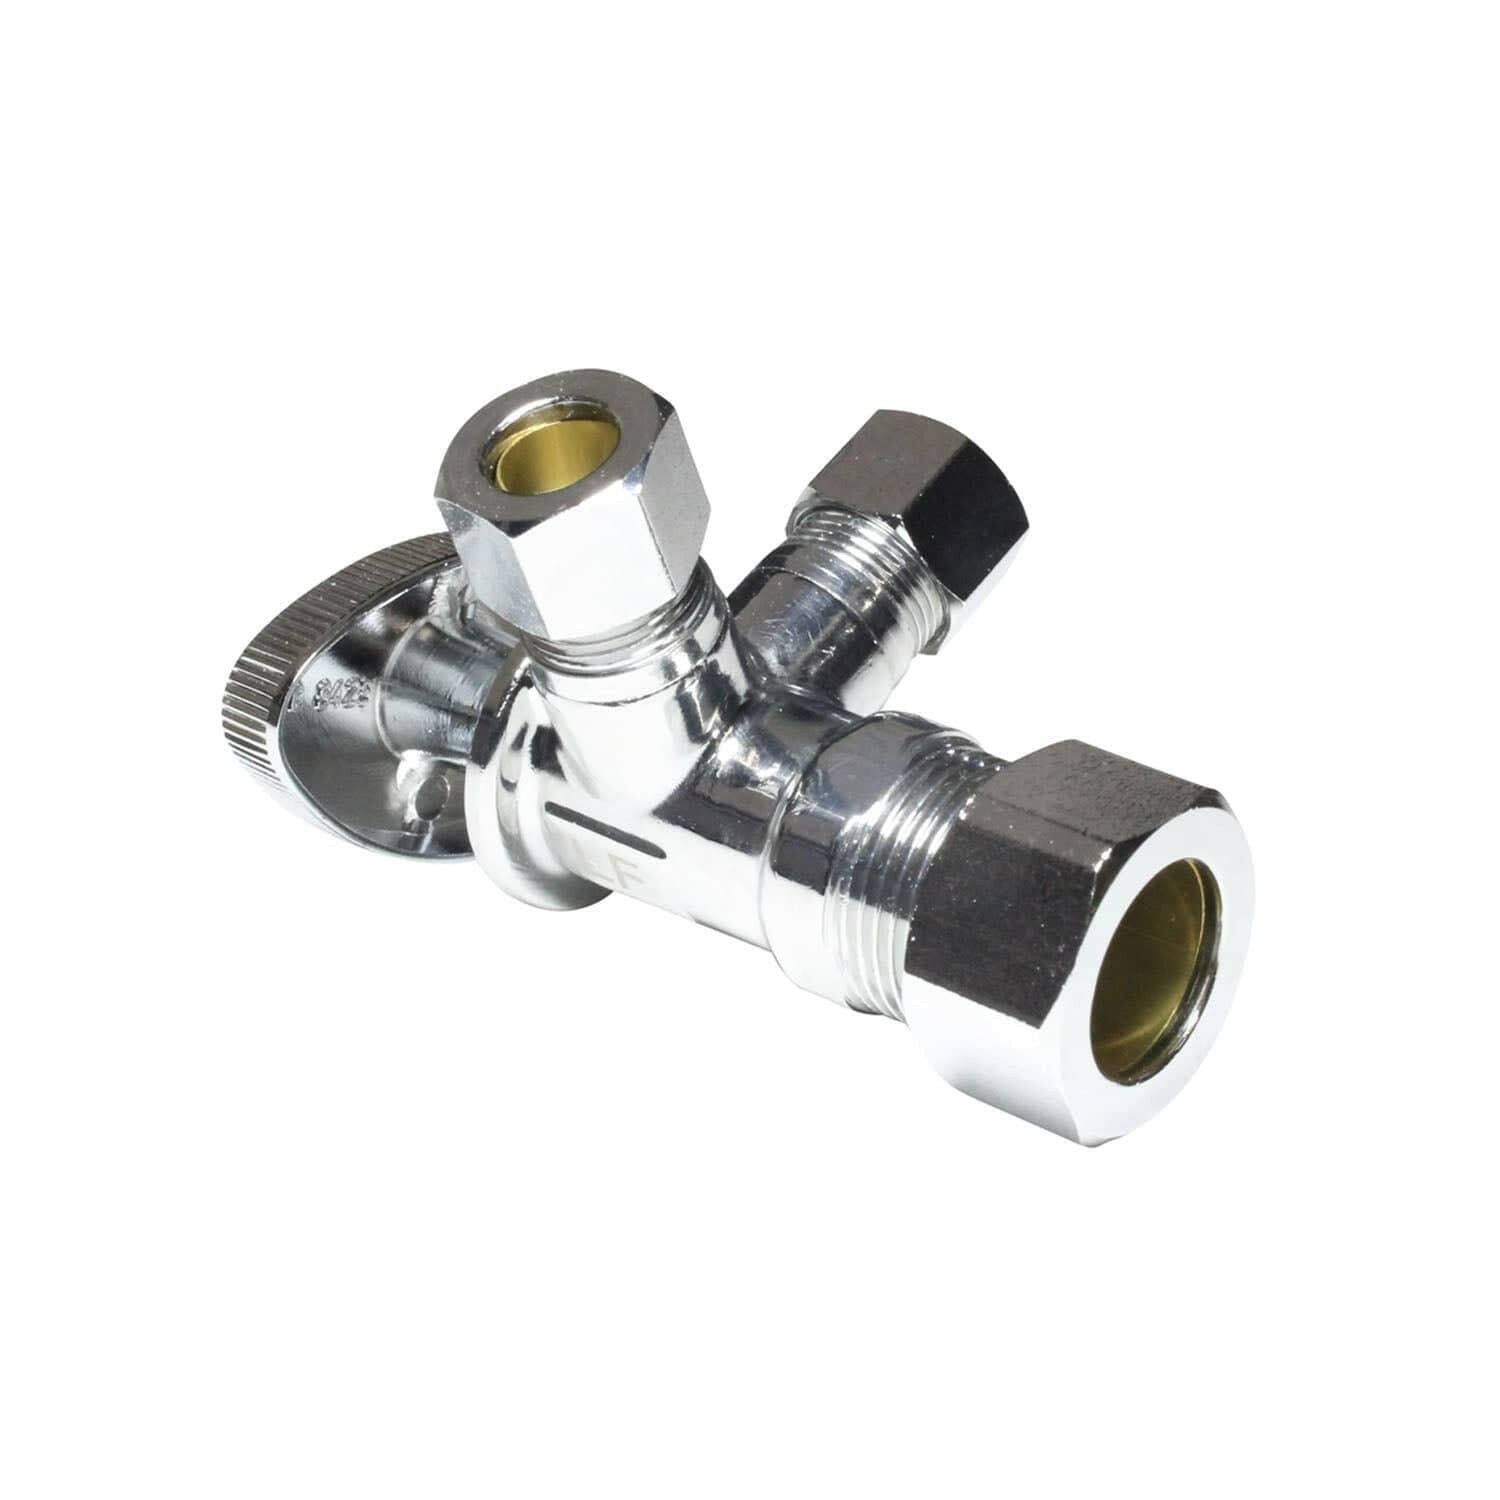 3/8" x 3/8" 1/4 Turn Dual Compression Angle Stop Valve